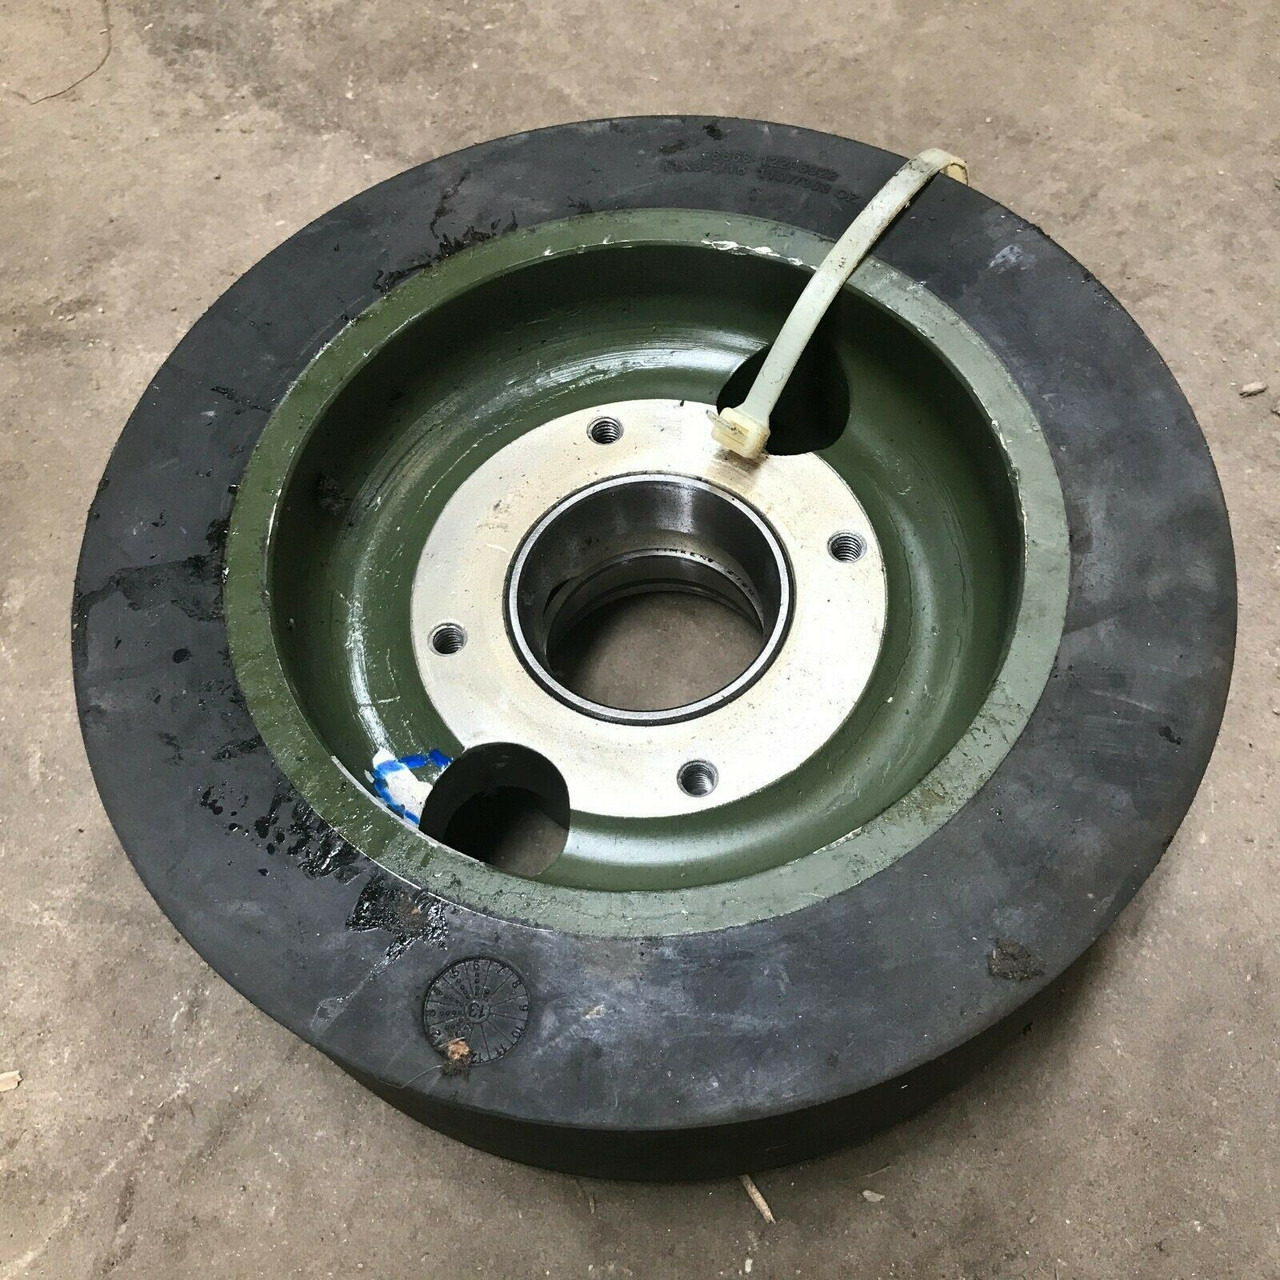 Solid Rubber Tire Wheel for Military Vehicle Restoration 12296928